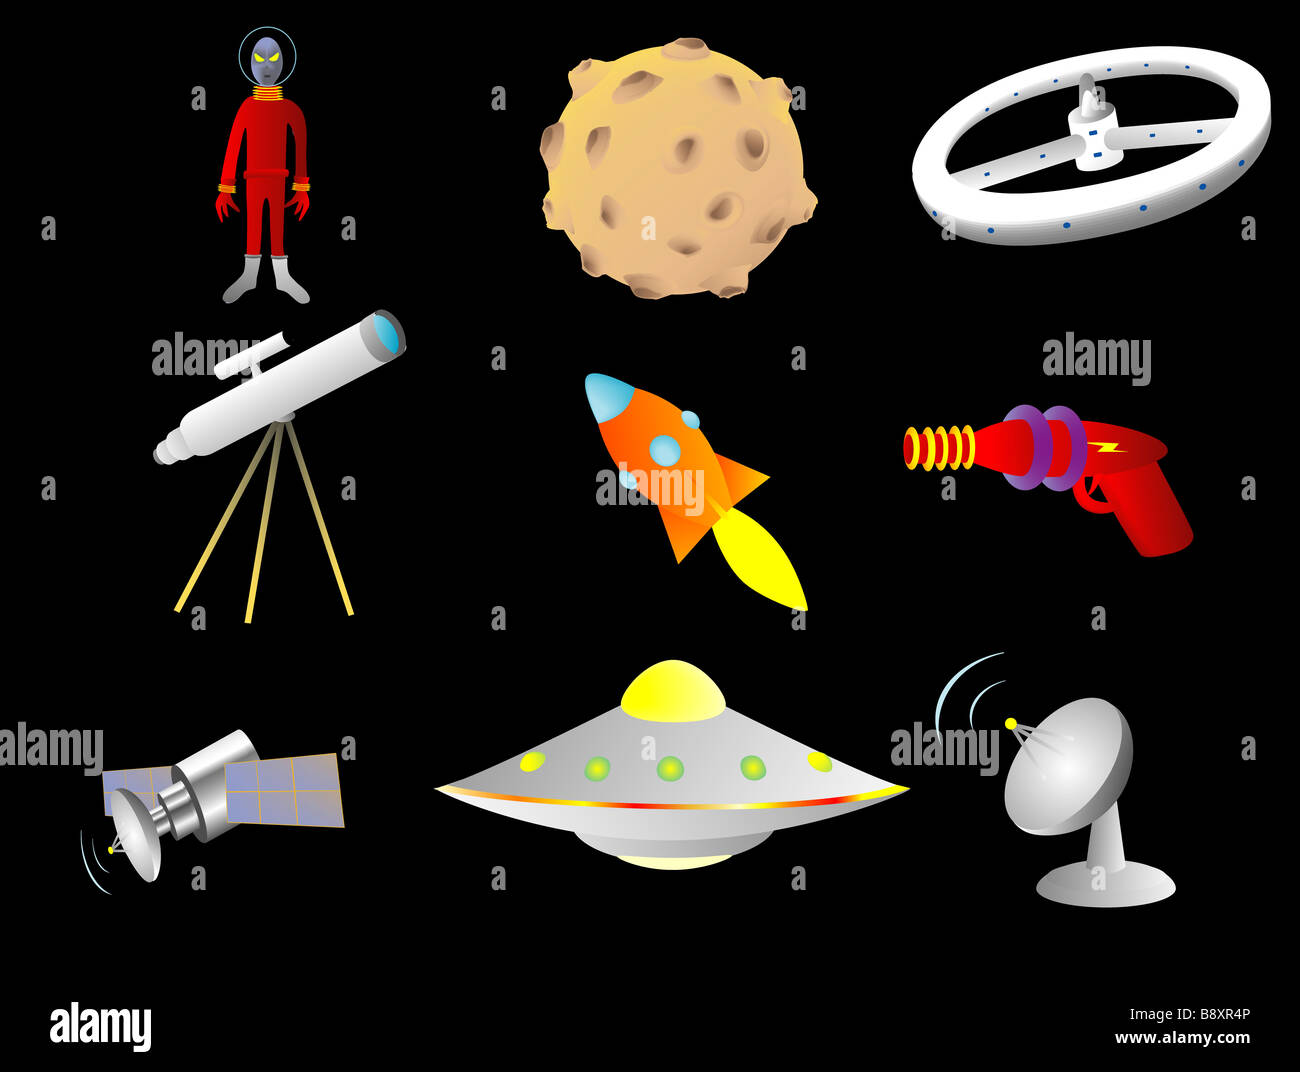 Objects with a space or science fiction theme vector illustration Stock Photo